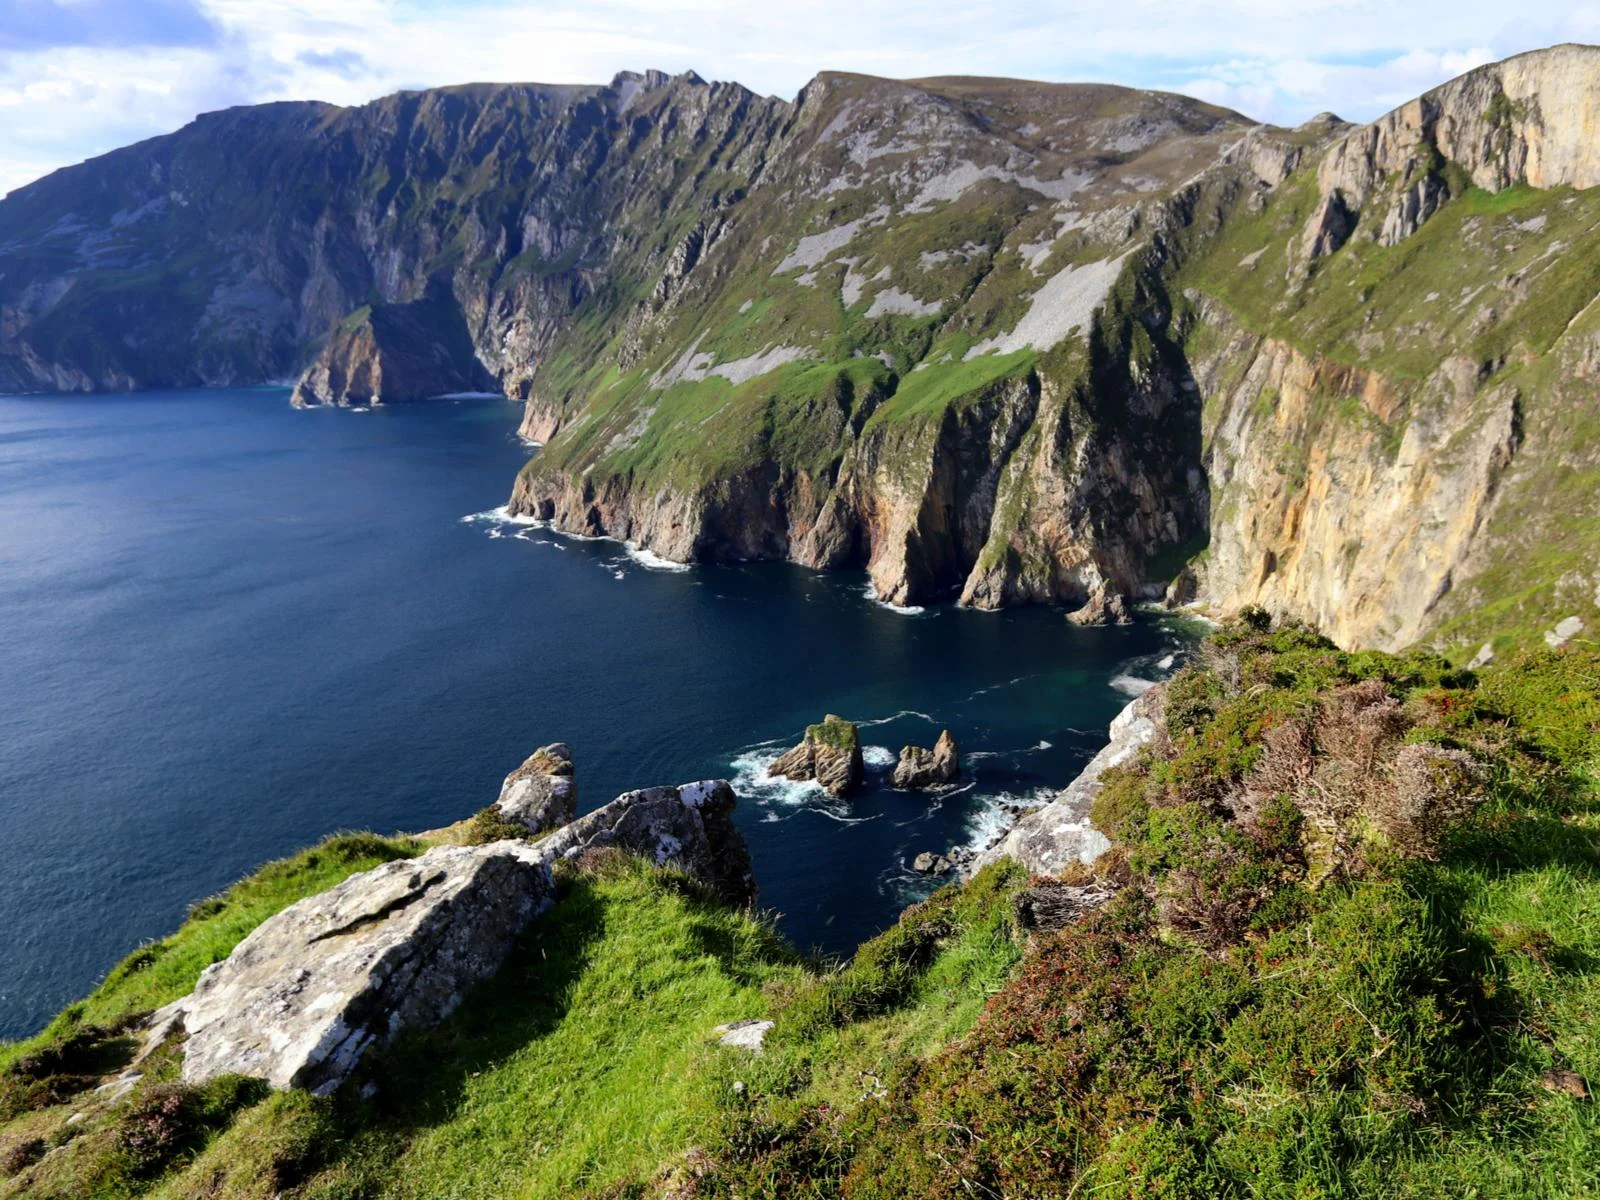 The tallest sea cliffs in Europe at Slieve League, known as one of the best places to visit in Ireland, with calm ocean at its foot